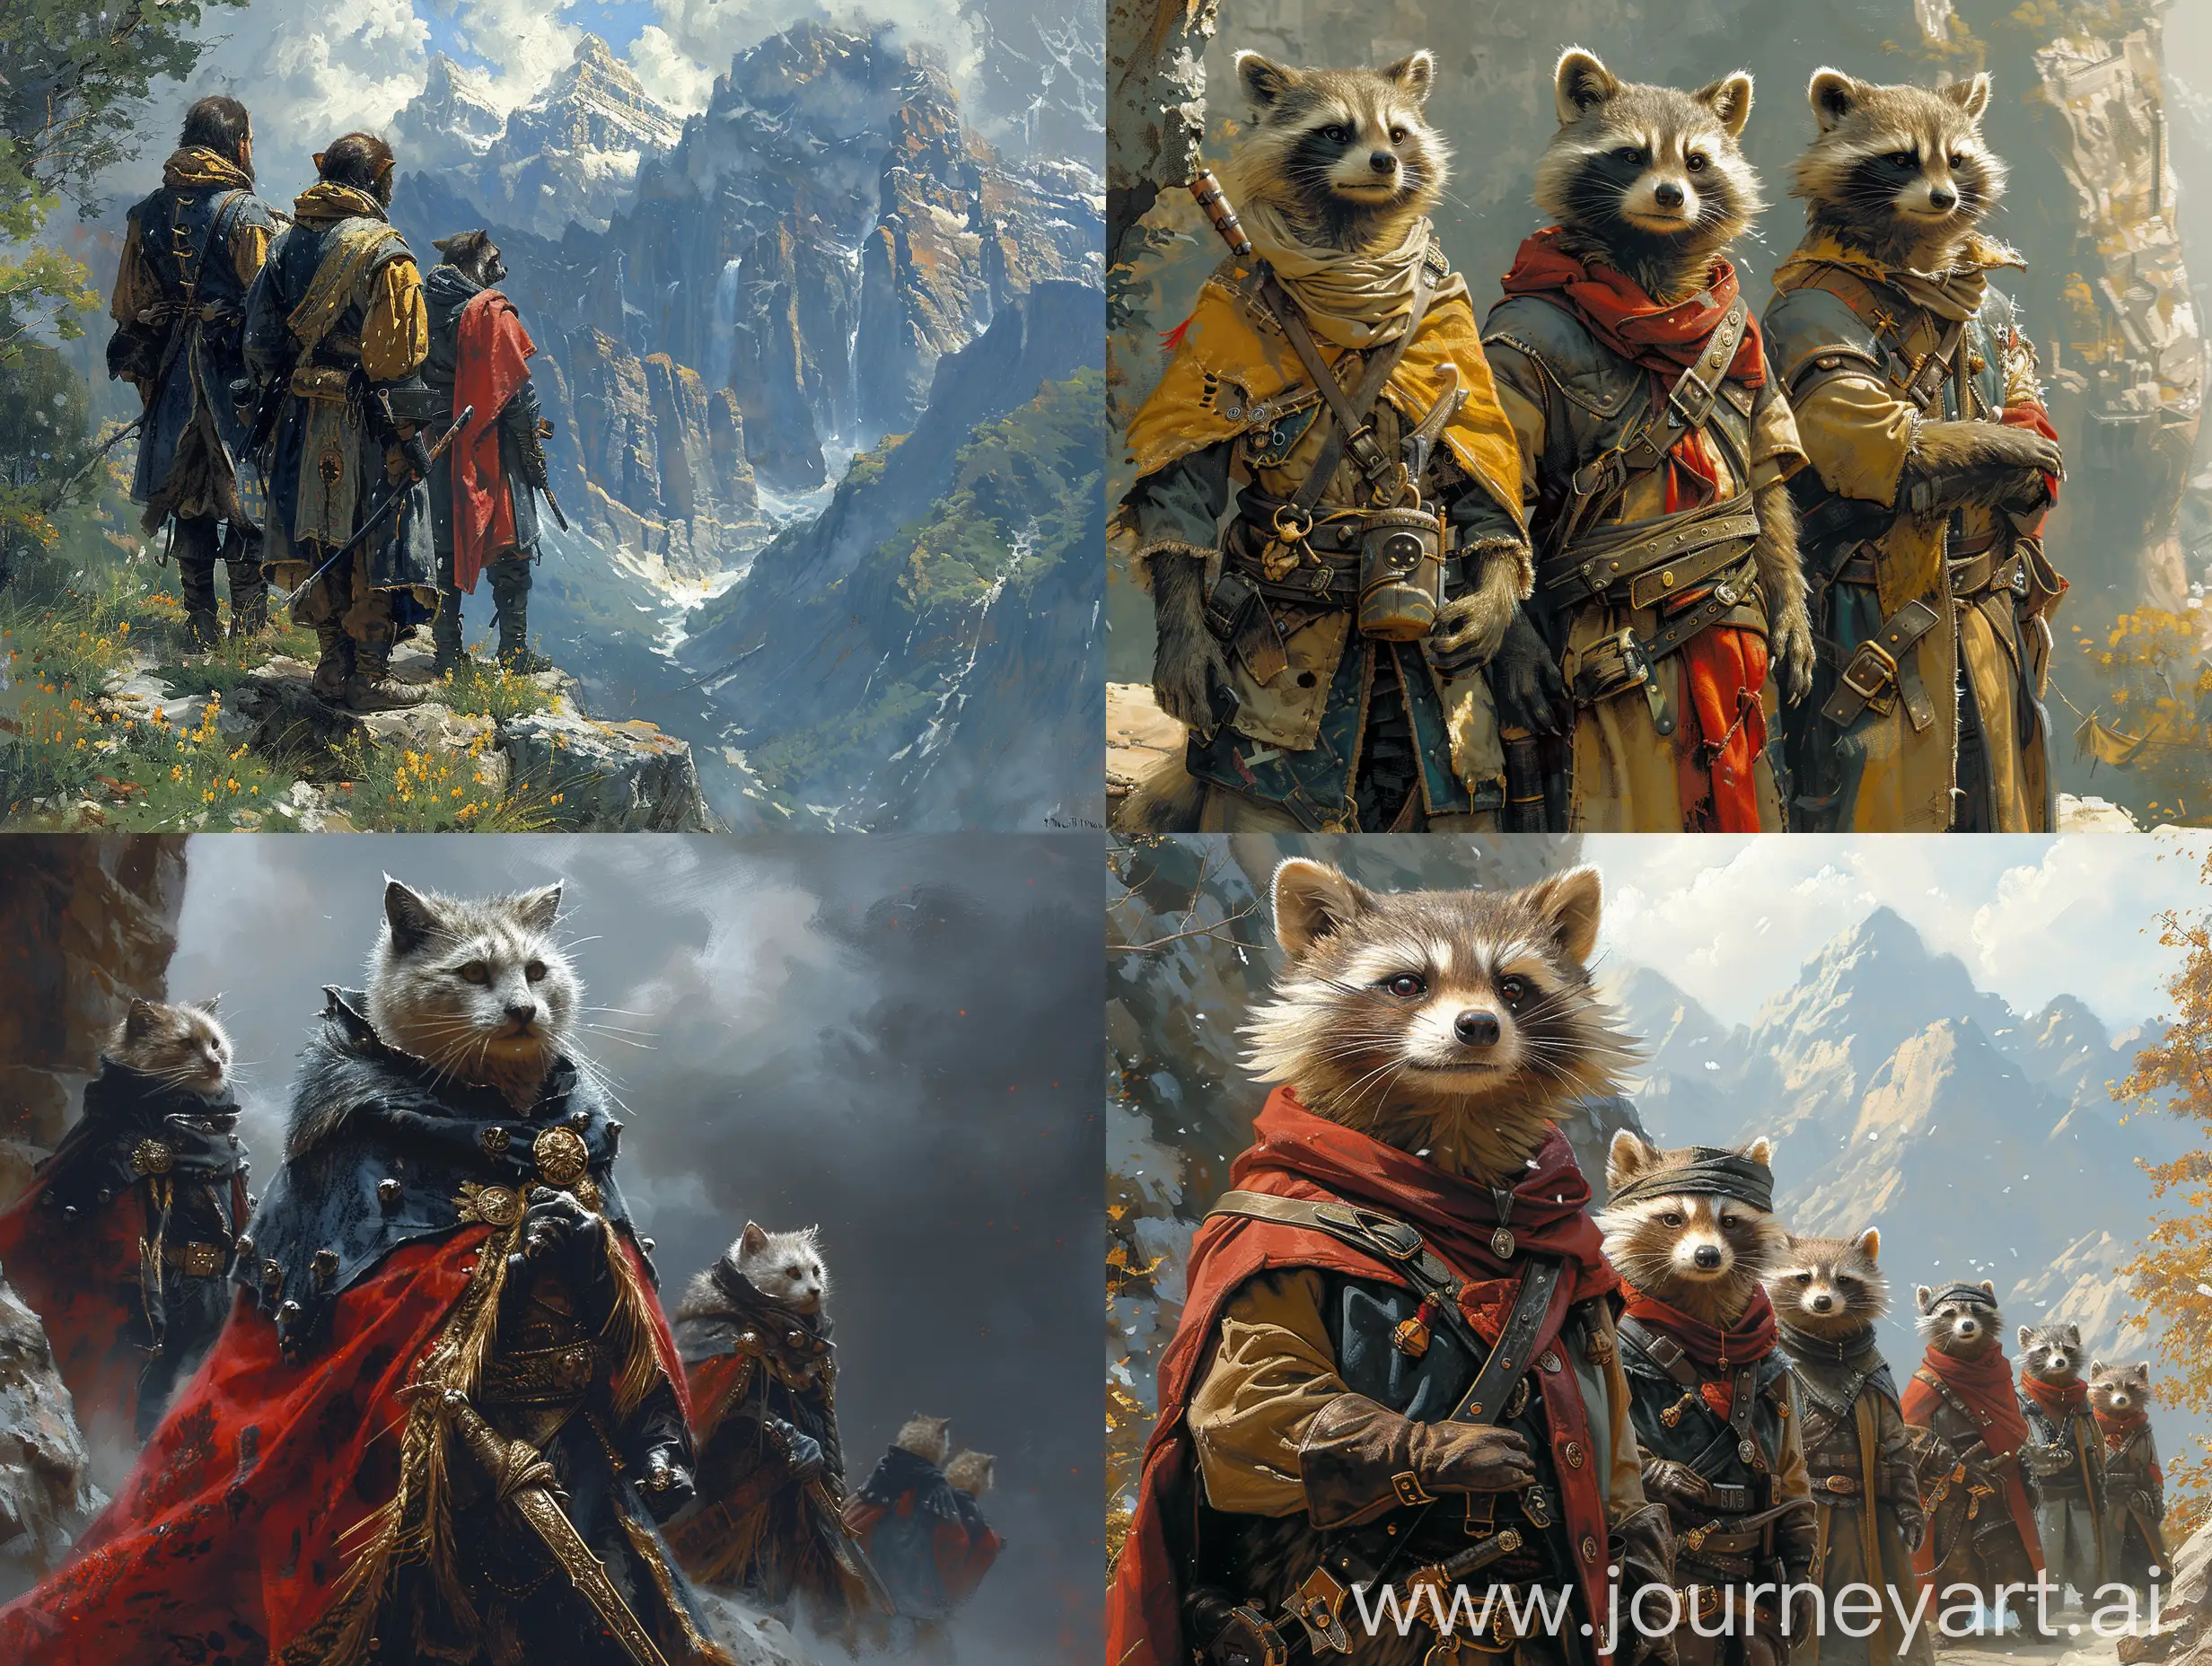 Oil Painting, a masterpiece, Baroque-Victorian Painting of raccoons dressed as spanish conquistadors :: a 🦅, impressive :: in background is a thunderstorm and a canyon ⛈️, lightning ⚡, rain 🌧️ :: Realistic 1500s Oil Painting of anthropomorphic fursonas as the spanish conquistadors surveying the grand canyon's wooded south rim, the grand canyon being partially obscured by tree cover, them walking a rudimentary trail, and they MUST be in spanish conquistador armor and clothing that features a red and gold/silver color scheme for the clothing and armor and ornate golden morrión hats. the realistic 1500s oil painting CANNOT HAVE regular animals OR humans in the painting. --stylise 750